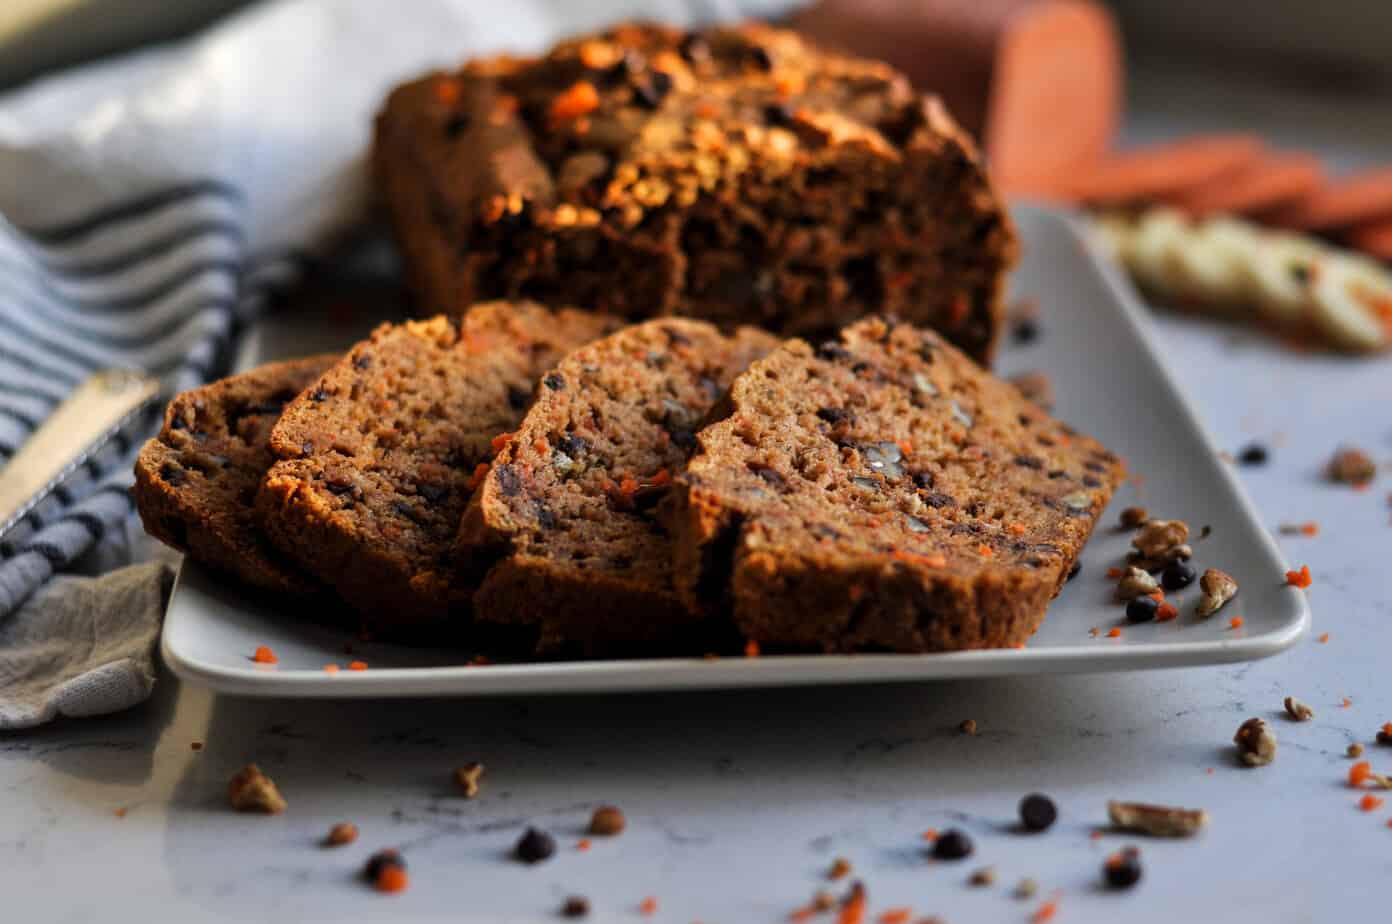 Chocolate chip carrot bread looking extra inviting and healthy with veggies blurred in the background.